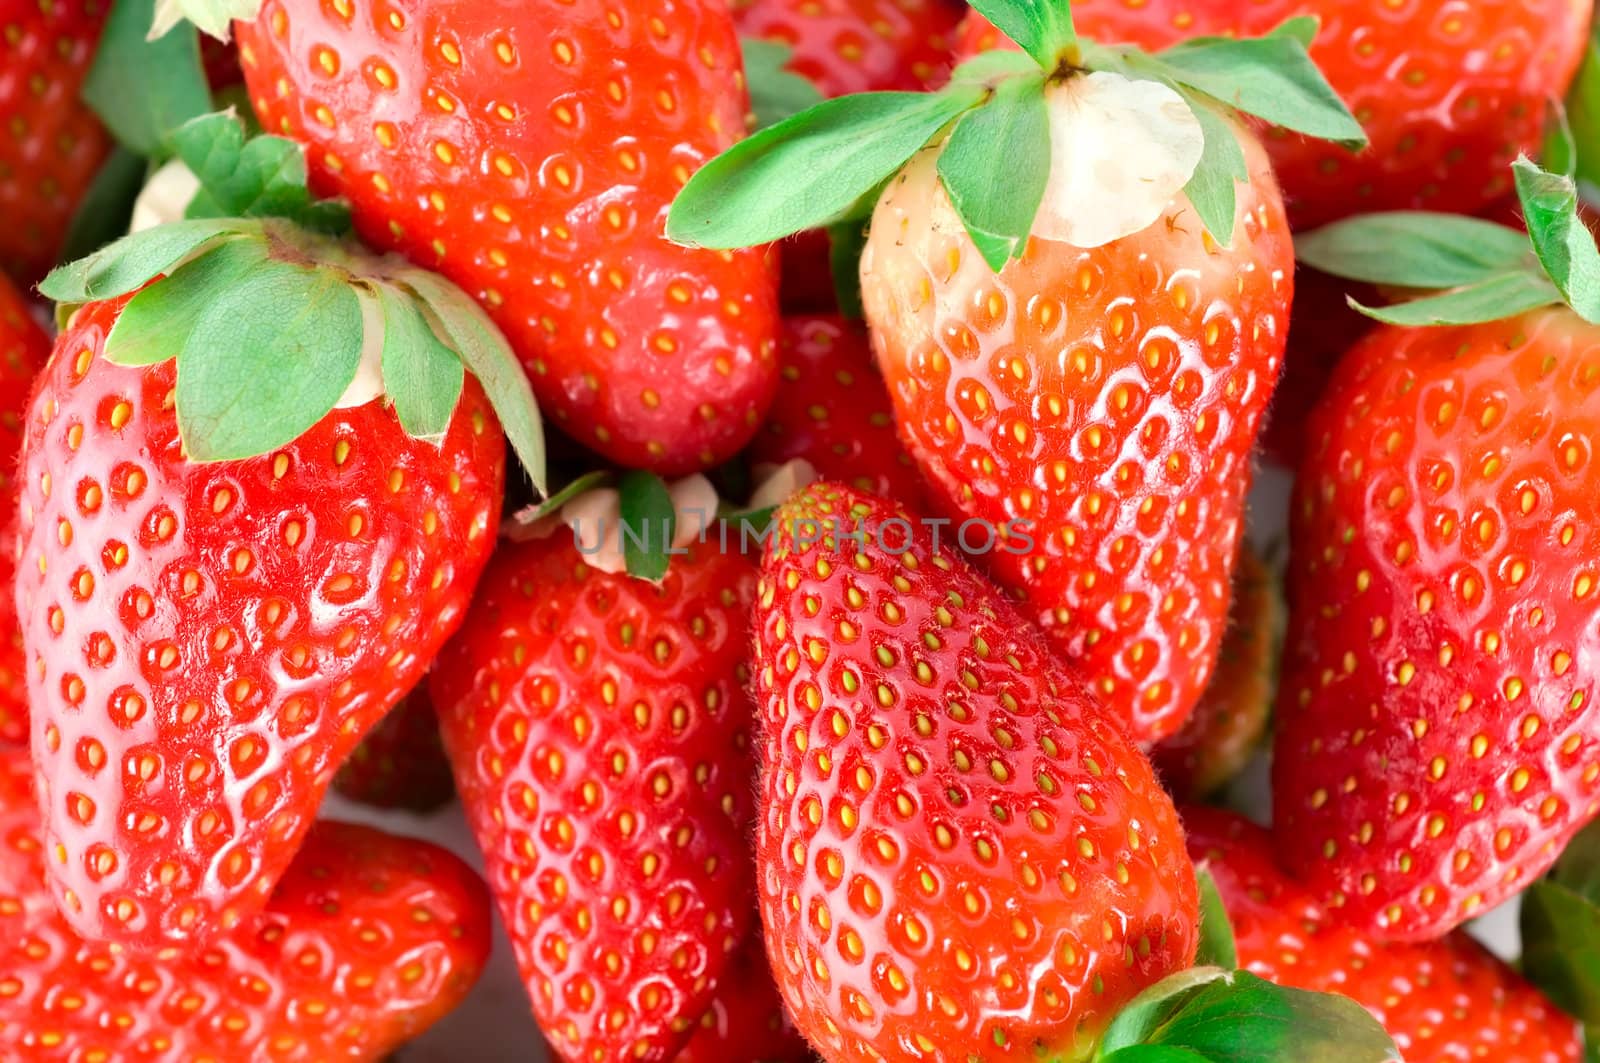 Mouthwatering strawberries by Givaga